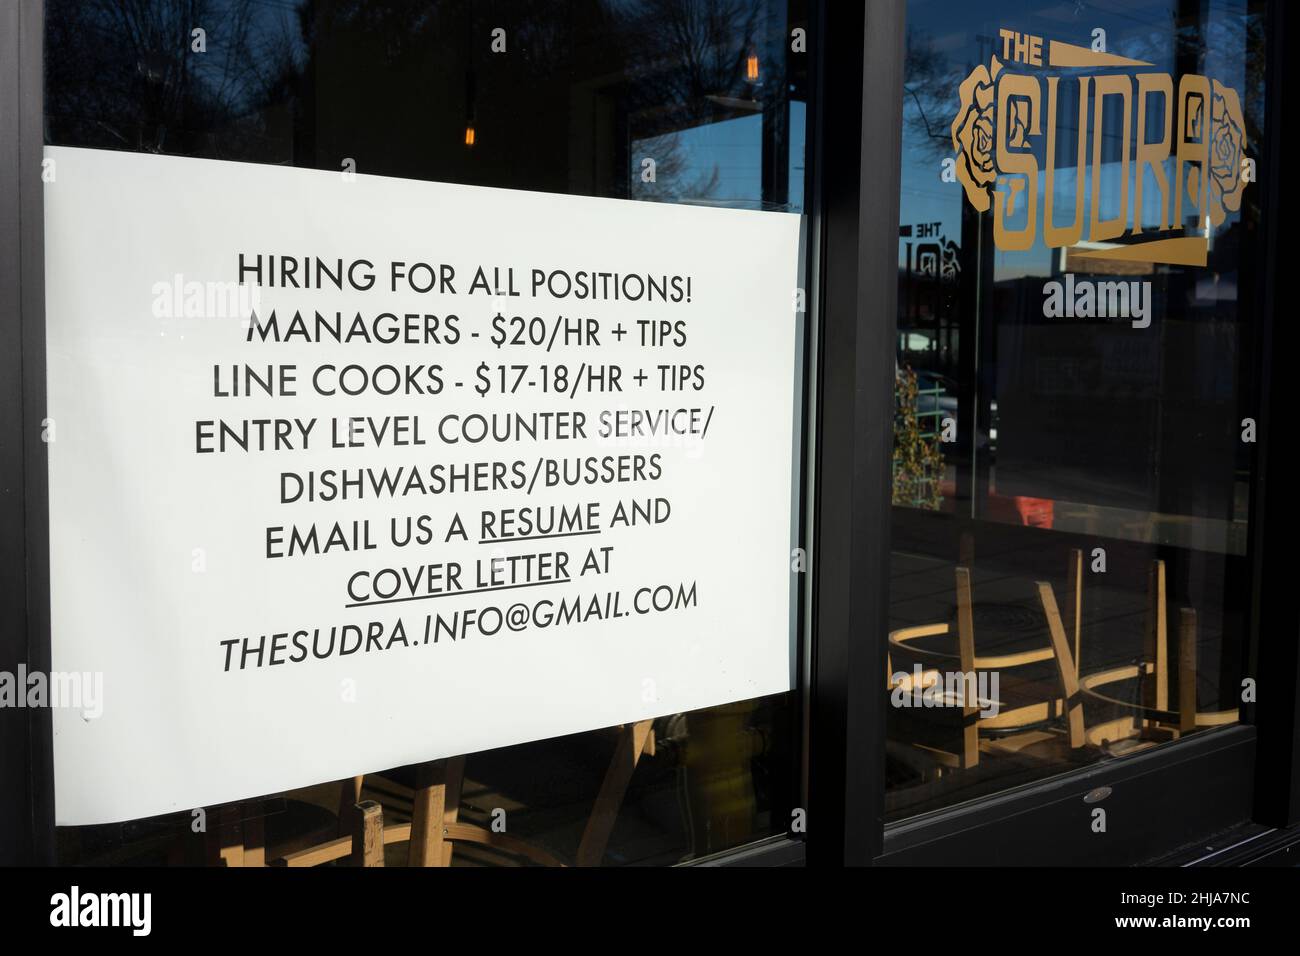 A hiring ad for all positions with promised hourly rates is seen at the Sudra, a vegan restaurant in Beaverton, Oregon, on Tuesday, January 25, 2022. Stock Photo